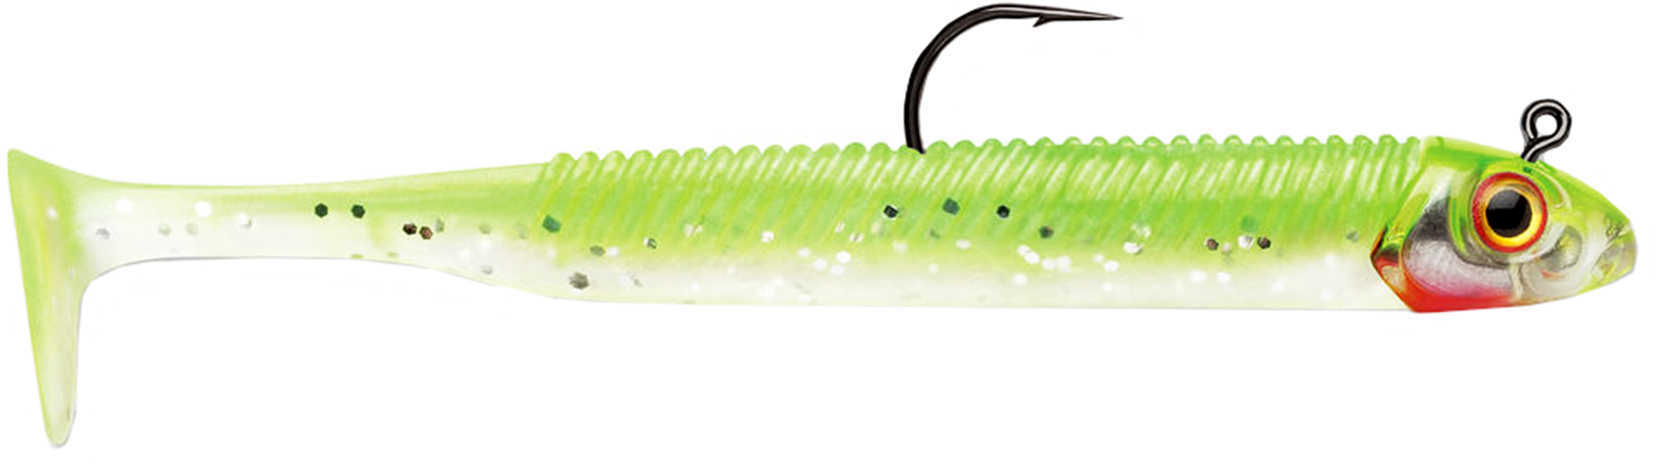 Storm 360GT Searchbait Lure 4.5 Inches 1/4 Ounces, Chartreuse Ice, Per 1 Md: SBM45CI-14J